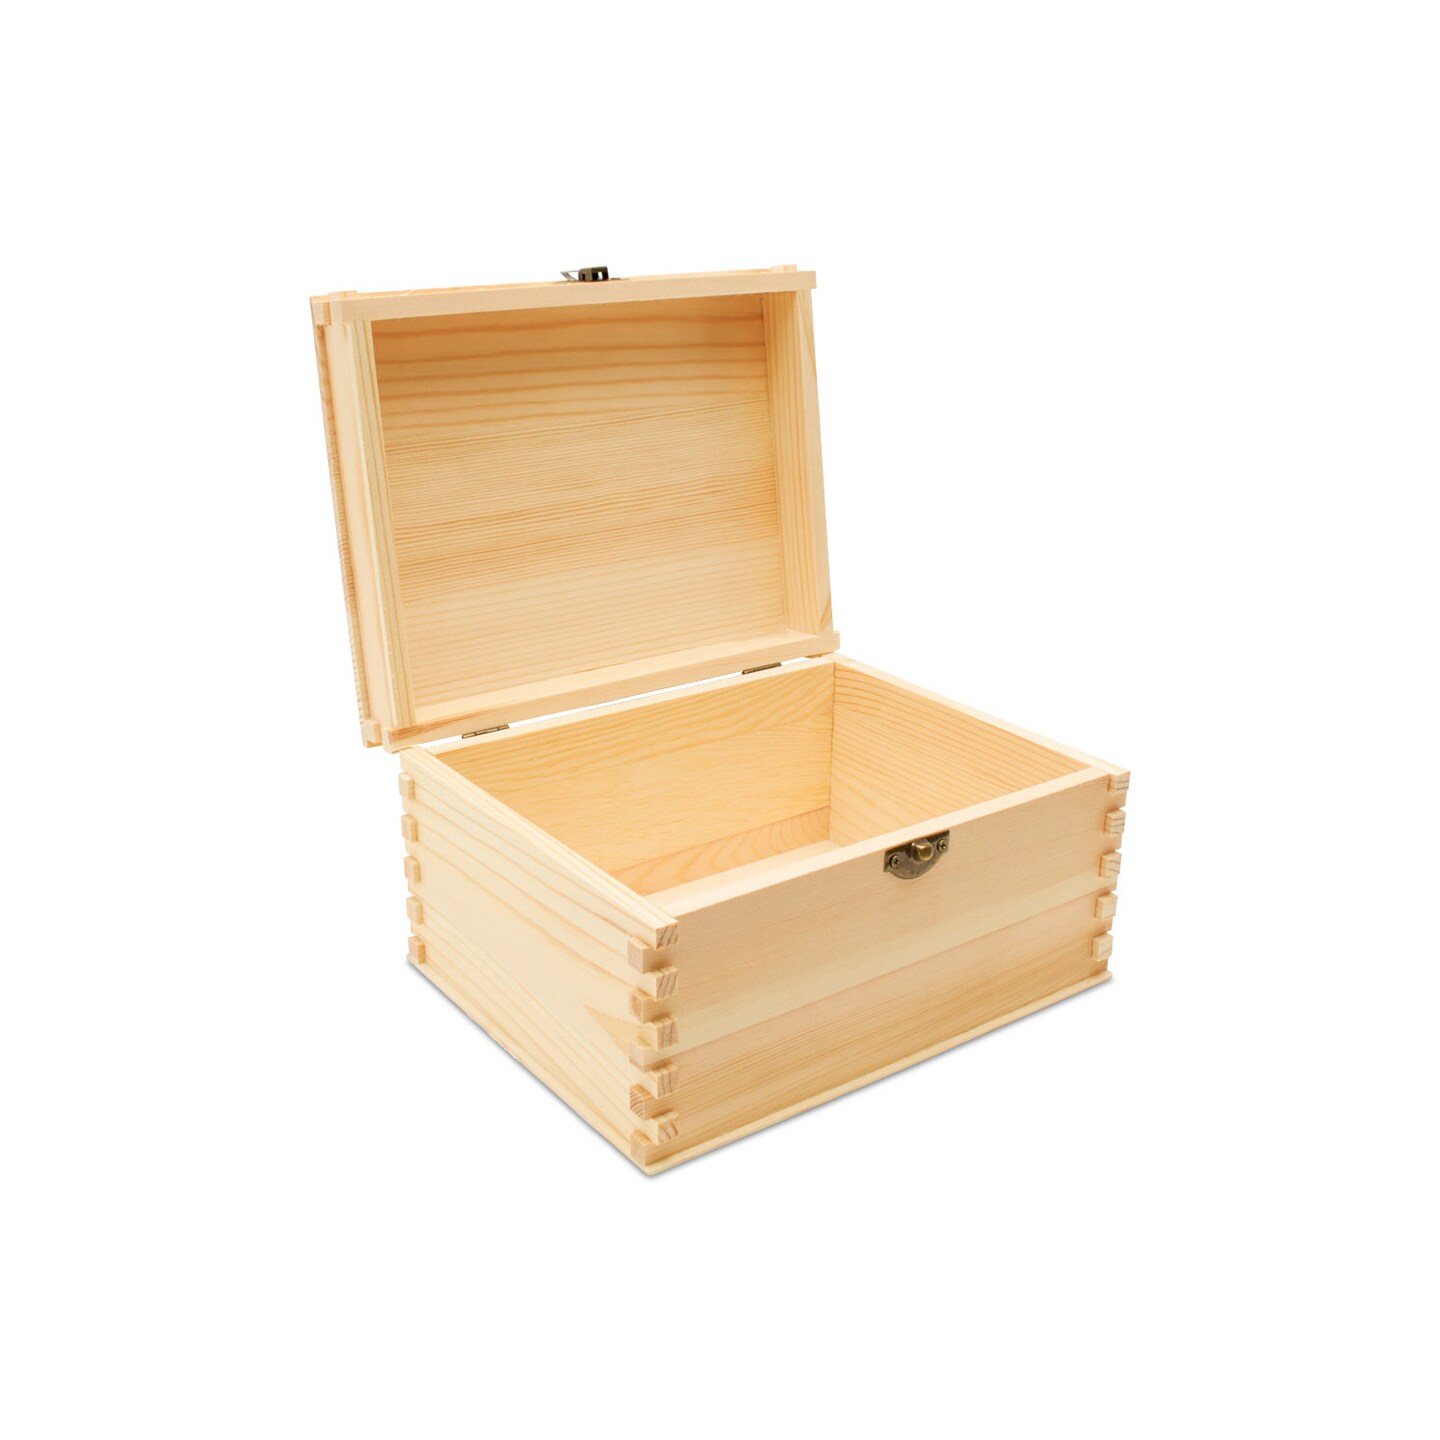 Wooden Nesting Boxes with Hinged Lids, Unfinished, Set of 3 |Woodpeckers